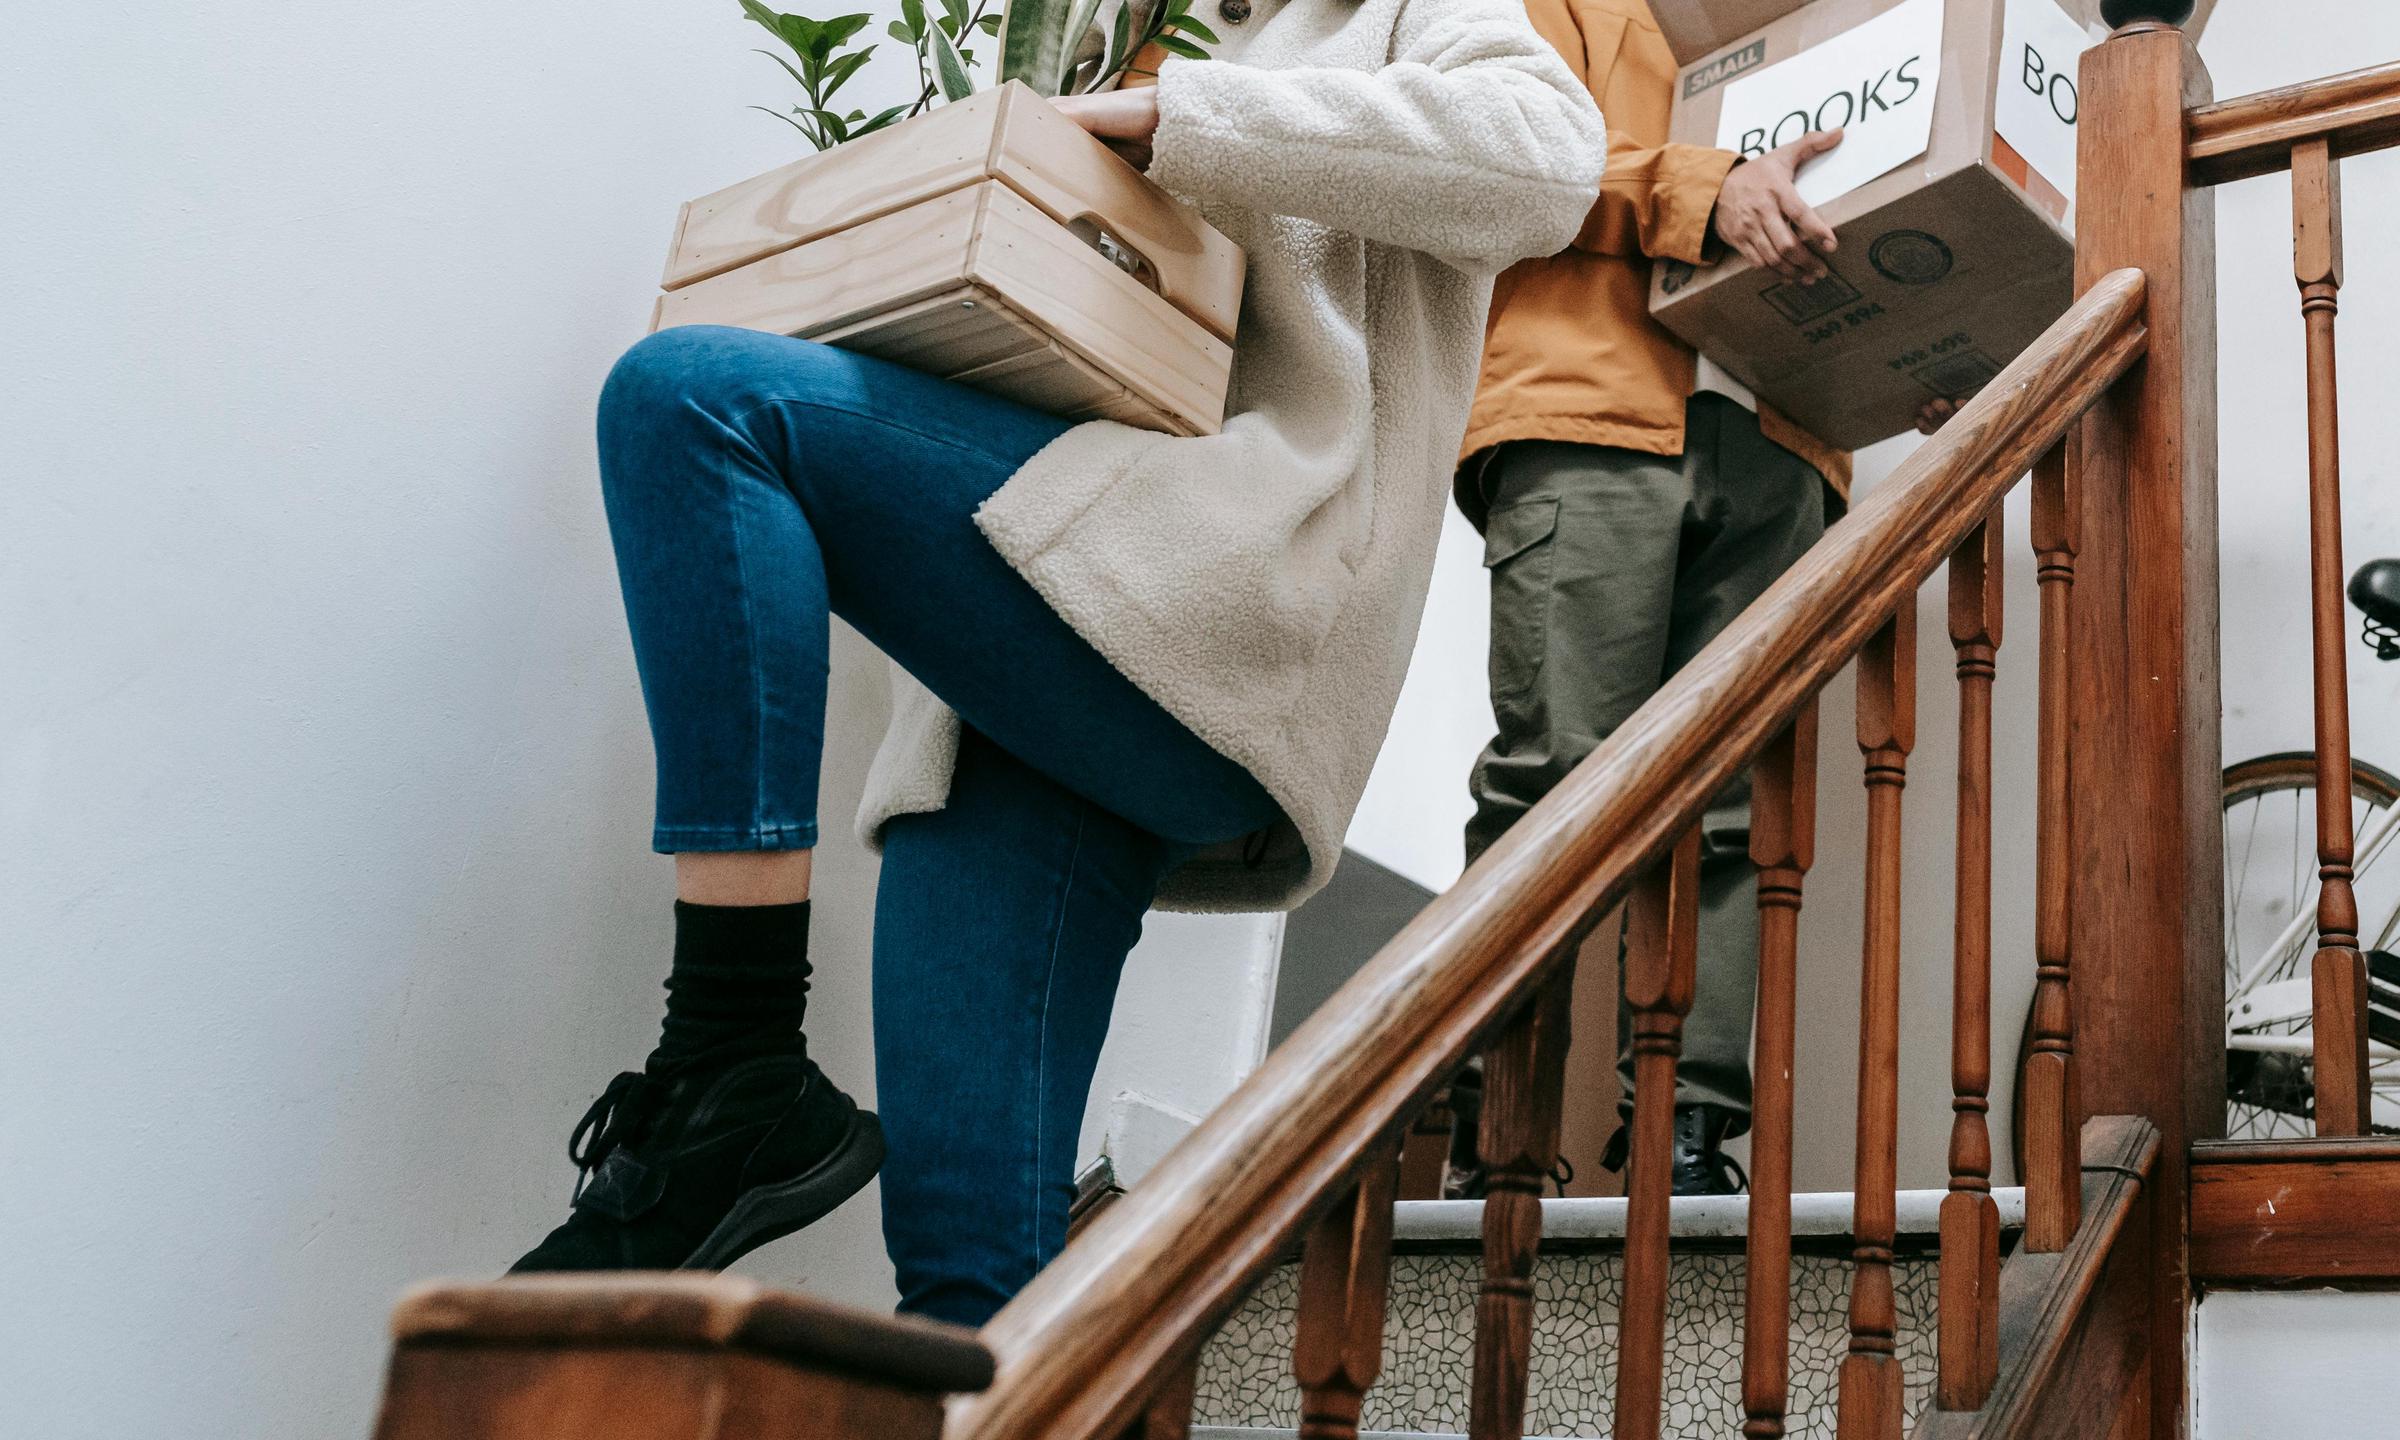 Packed items being carried down stairs | Source: Pexels